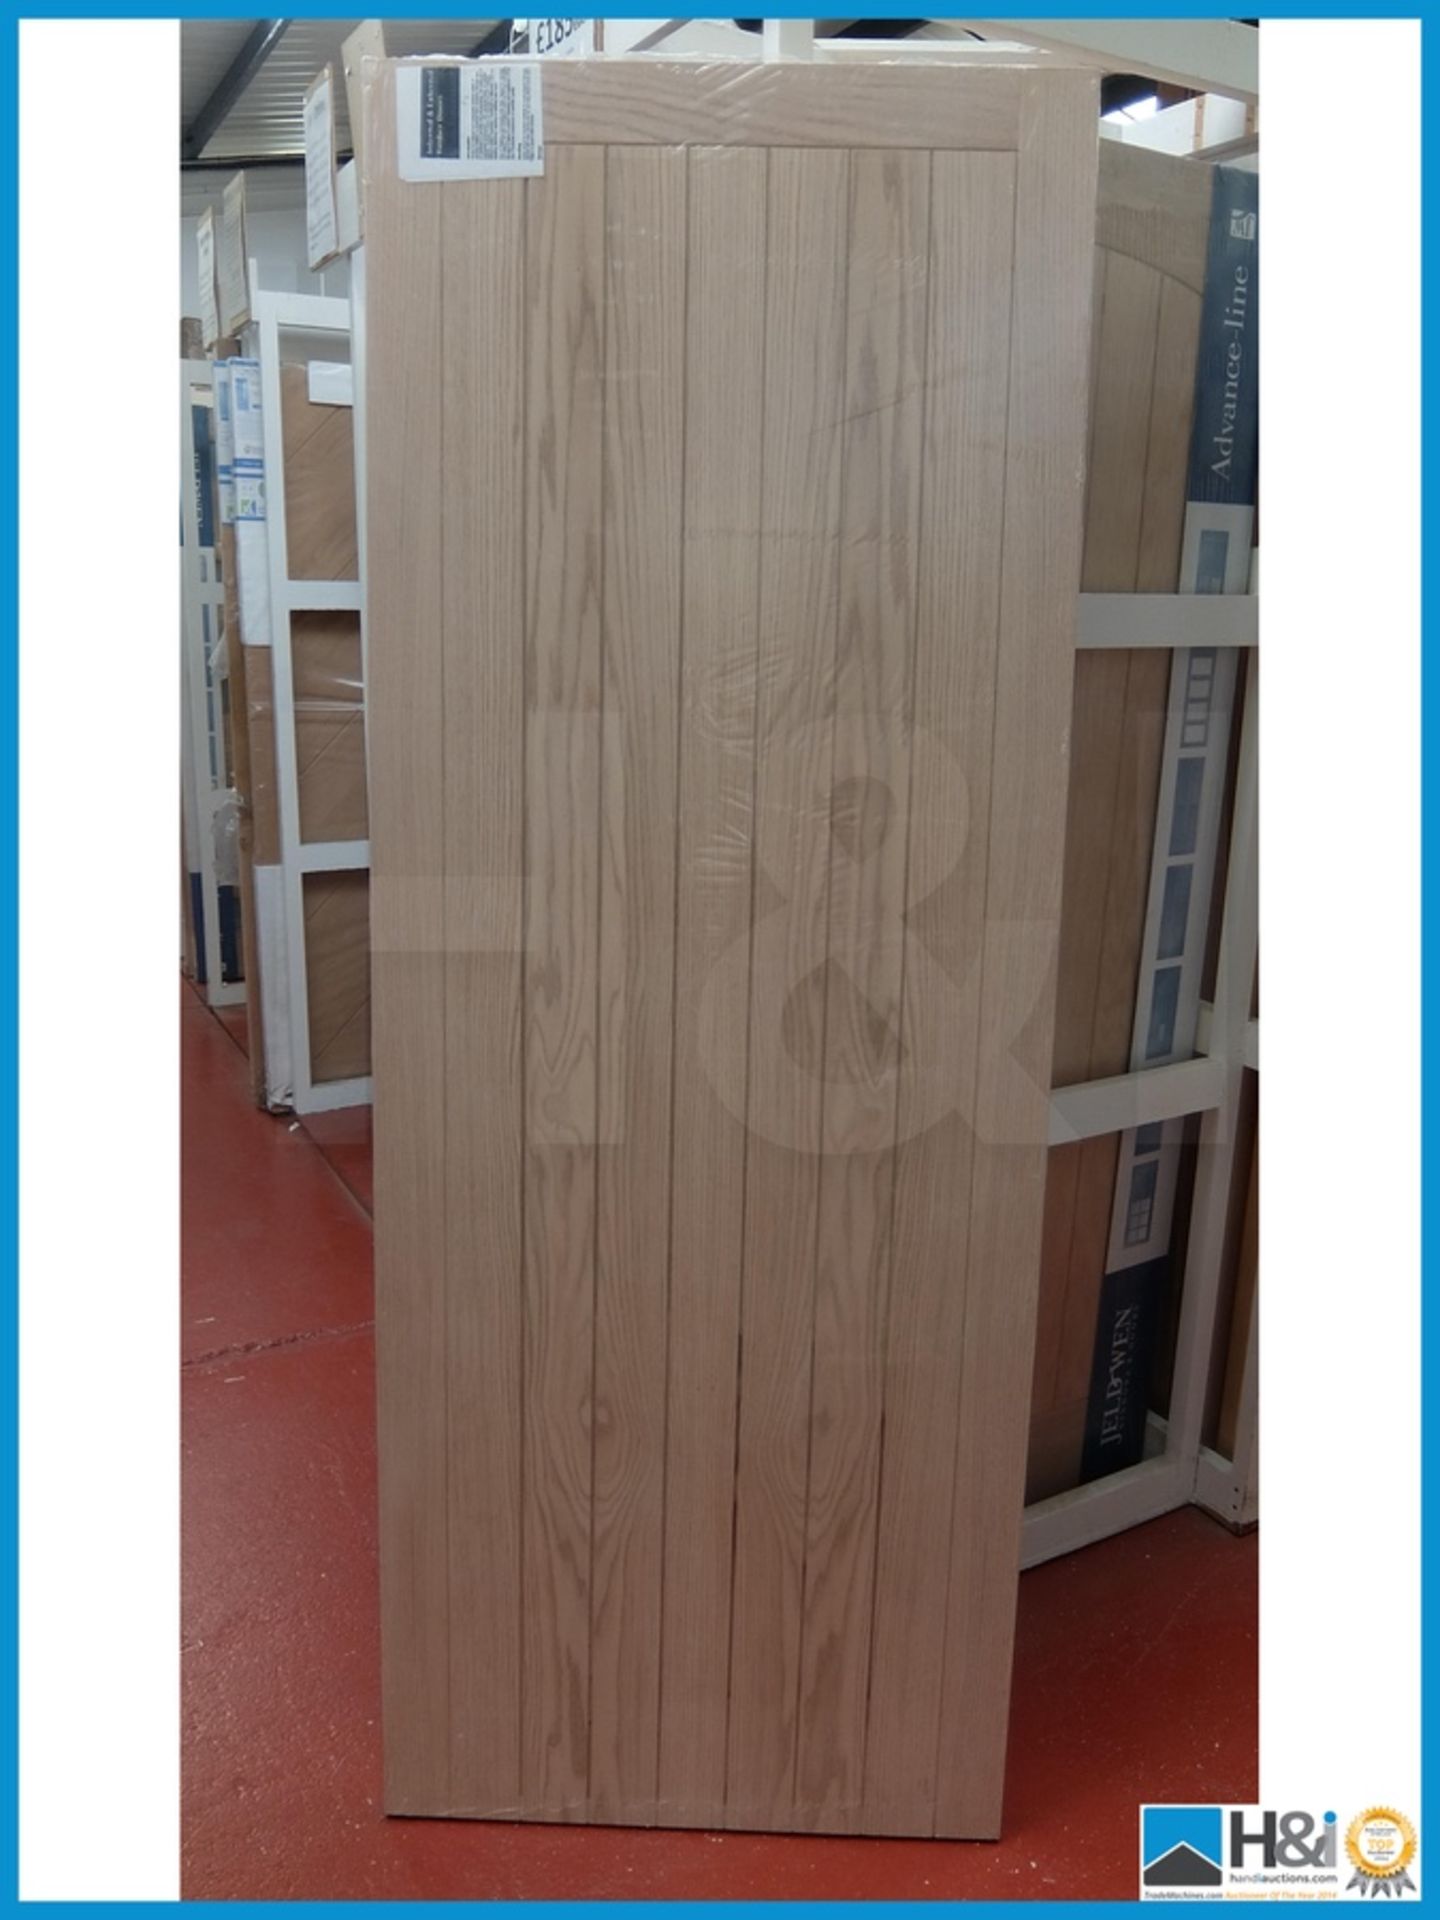 78x33" Oak Frame, ledged and Braced Internal door. 35mm thick. Appraisal: Viewing Essential Serial